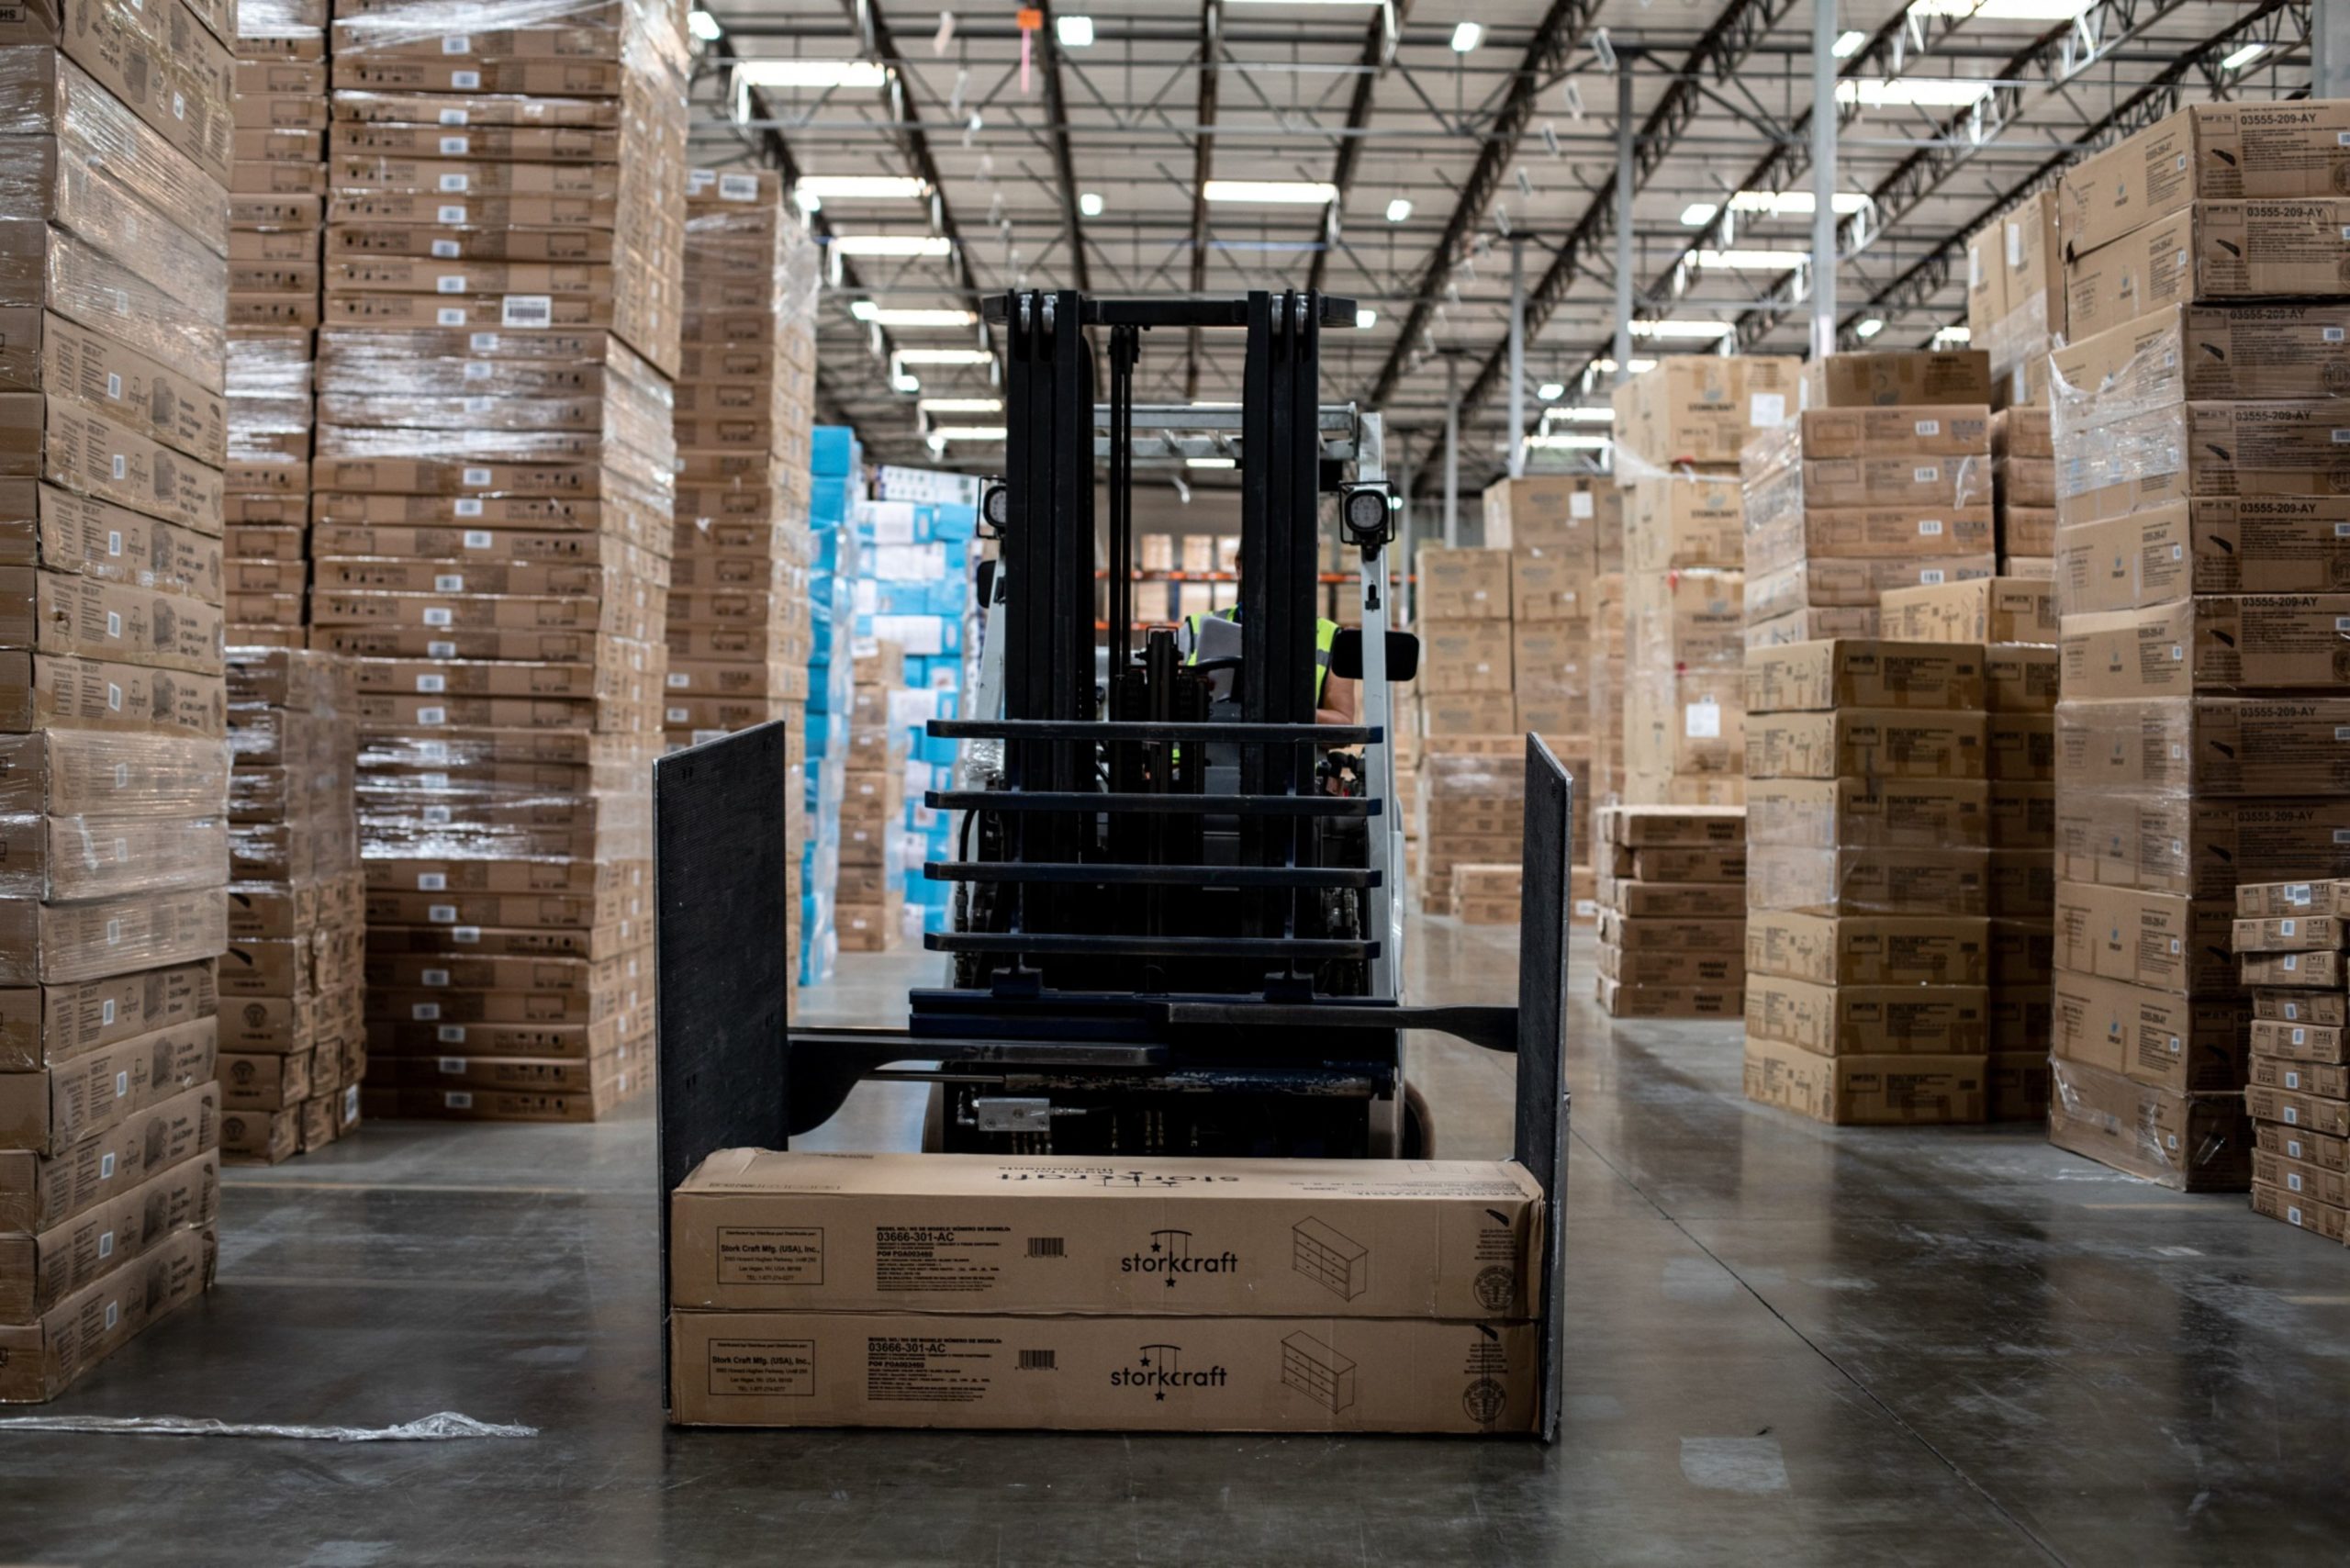 An employee is moving  order shipments that will be labeled and prepared to be delivered to online customers at the Stork Craft Manufacturing Inc facility in Chino, California, U.S. on Monday Sept. 23, 2019. Photographer: Martina Albertazzi/Bloomberg